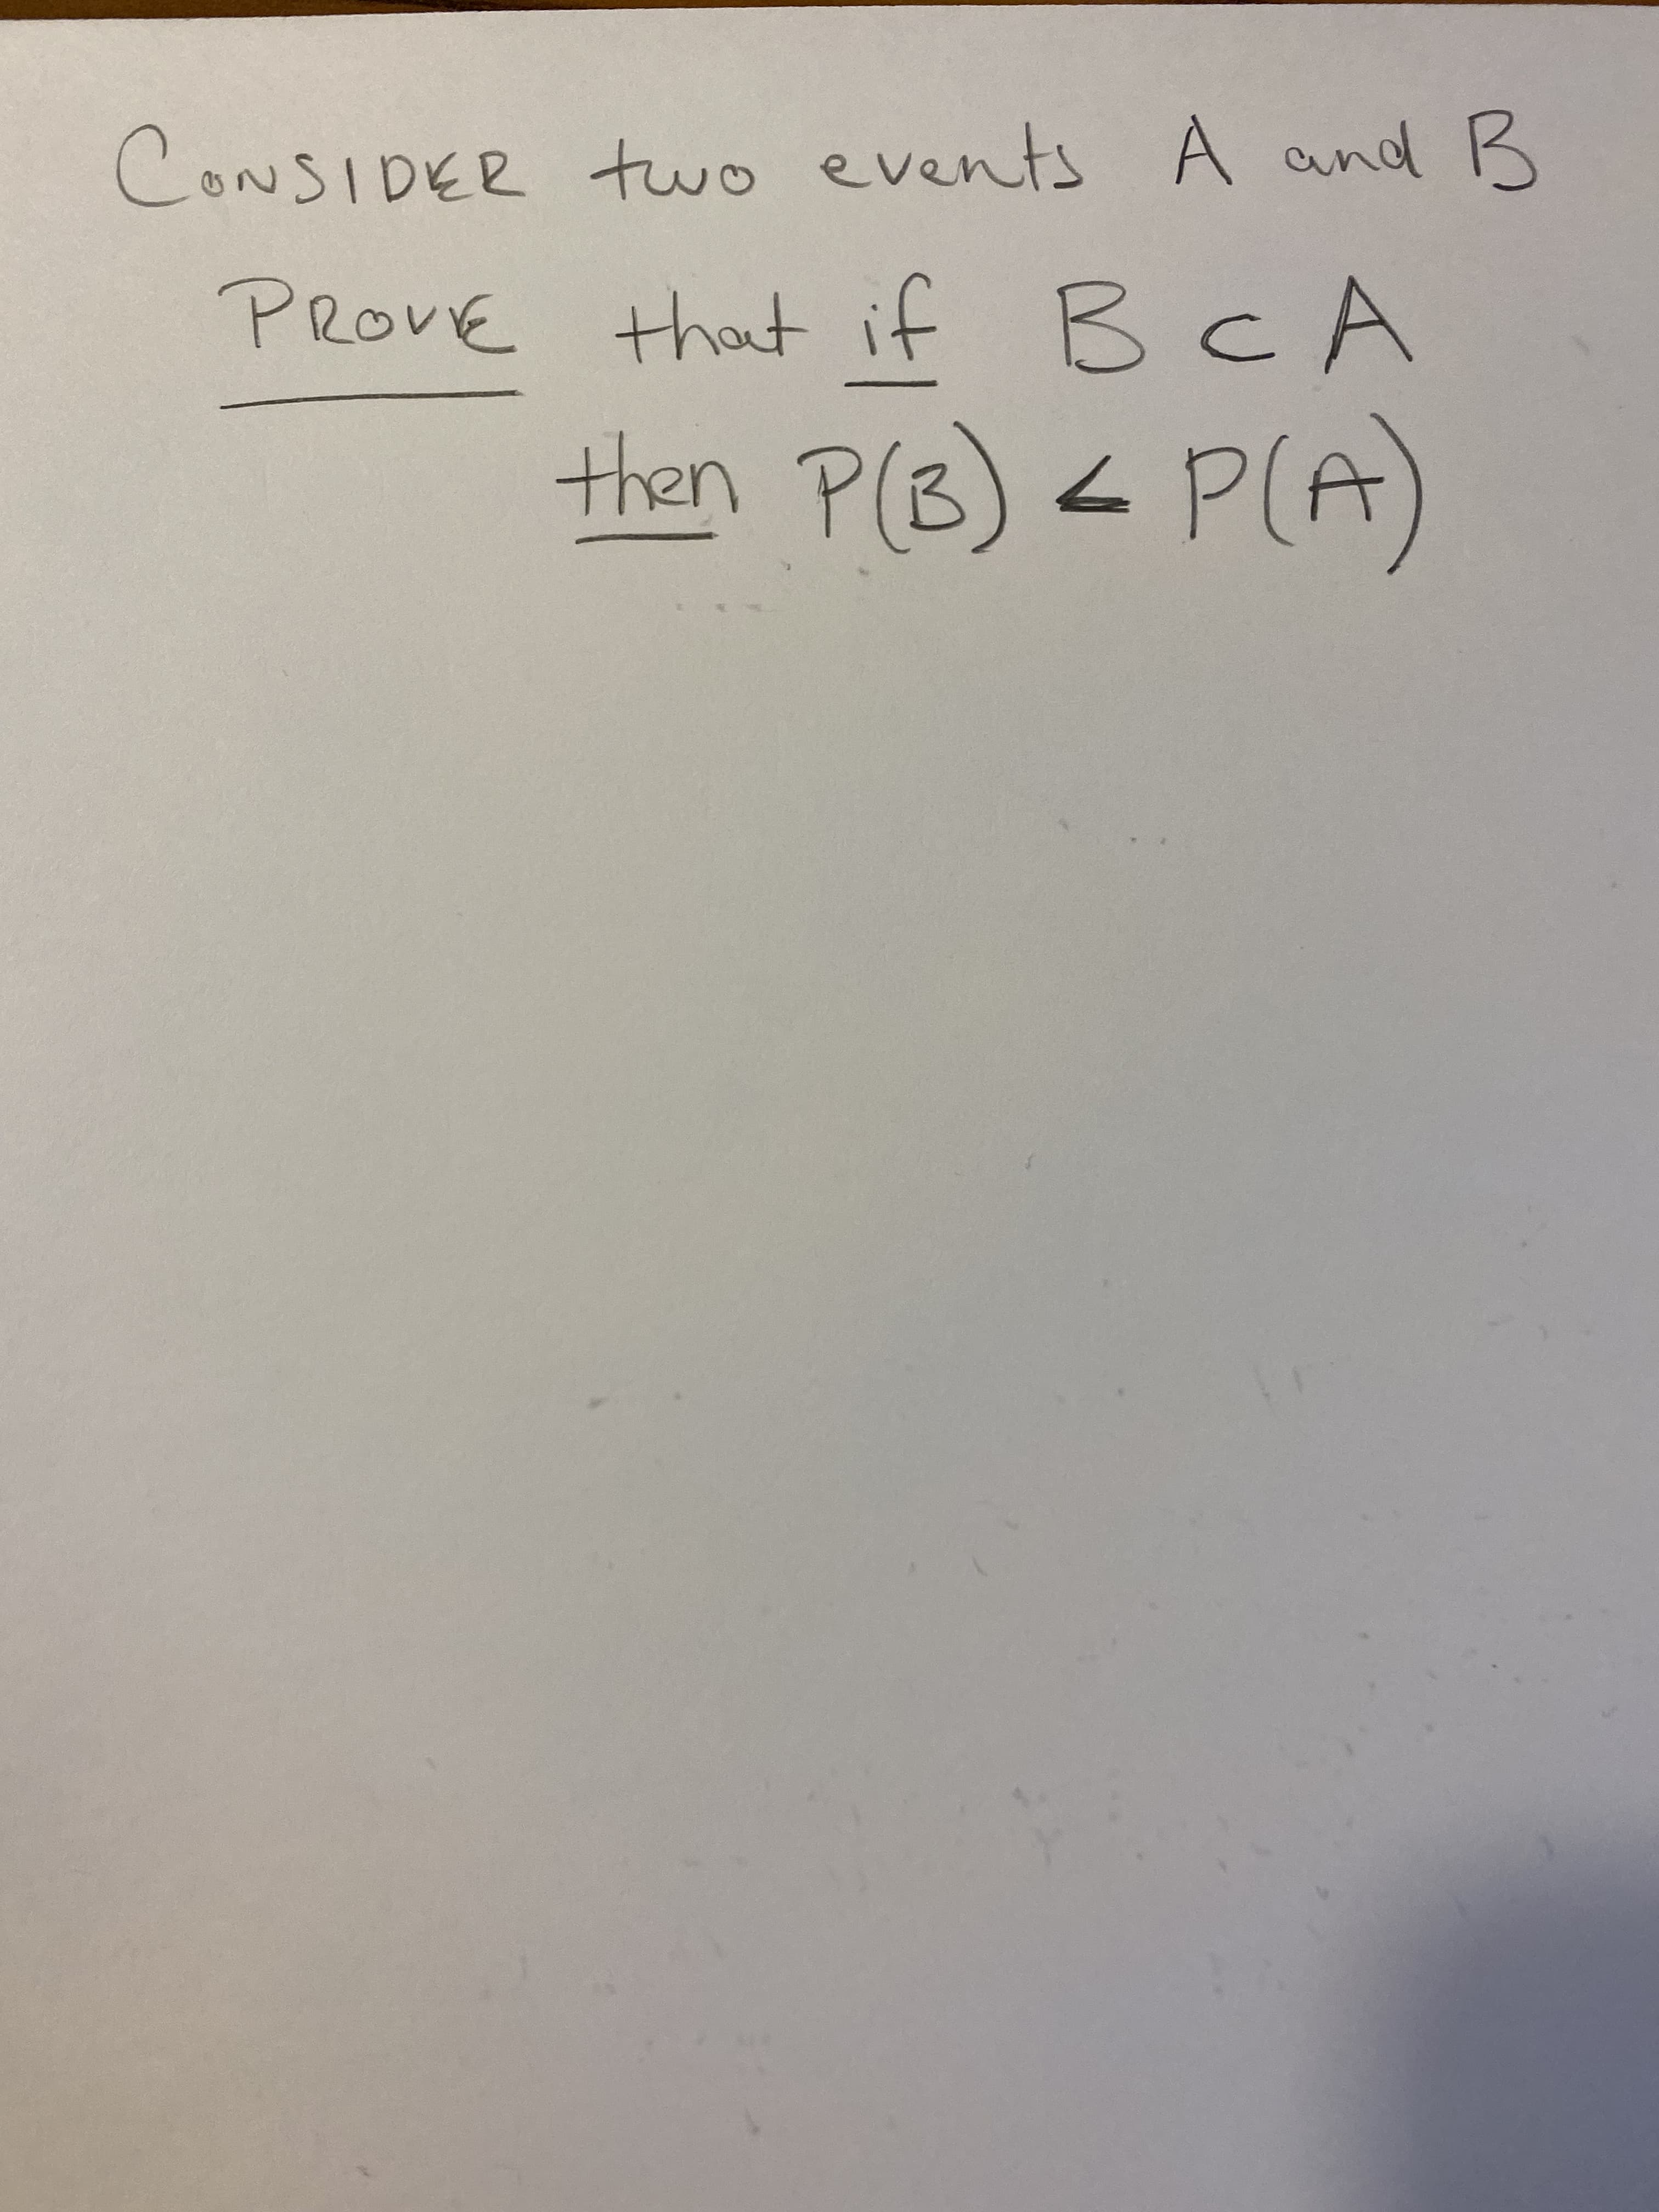 CONSIDER two events A and B
PROVE that if BCA
then P(B)
< P(A)
